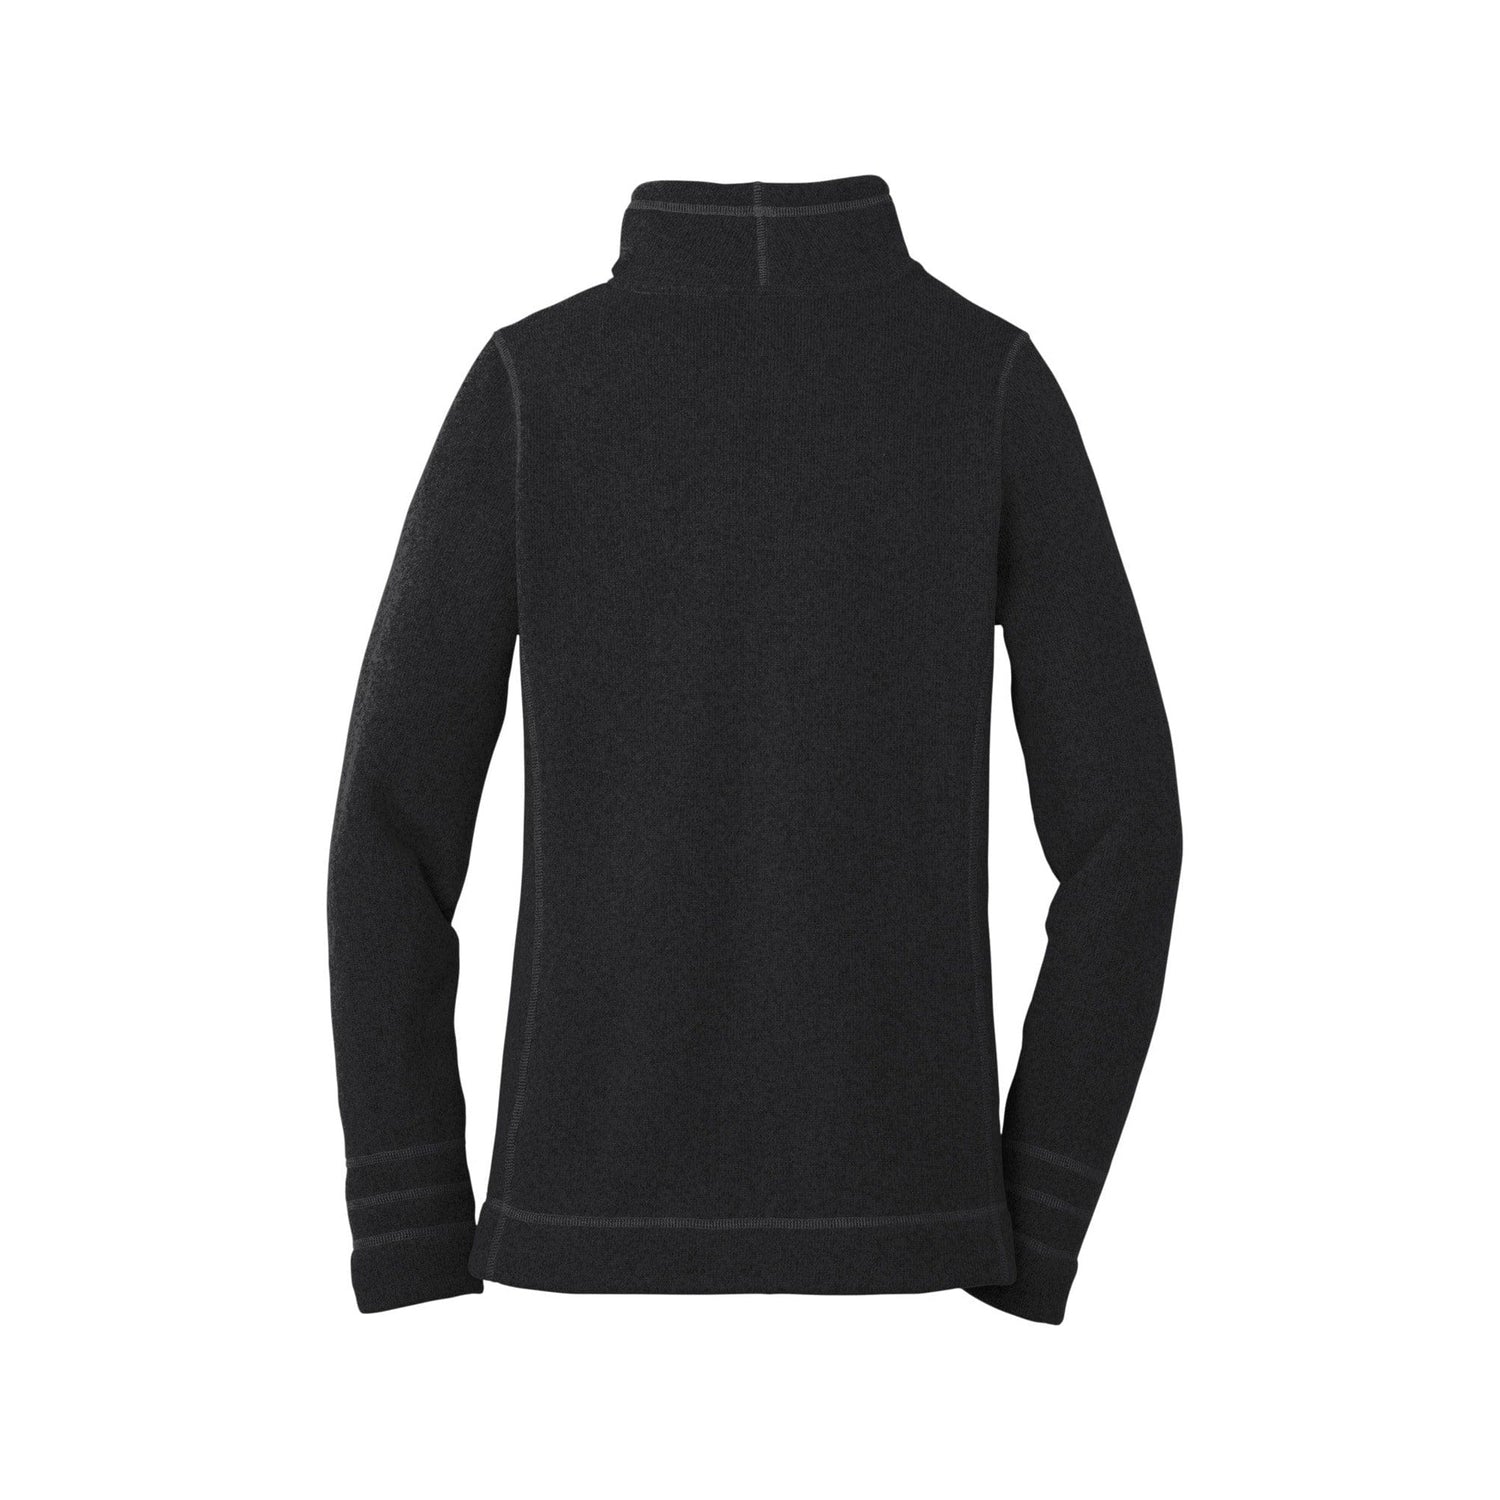 The North Face Sweater Fleece Jacket - Ladies